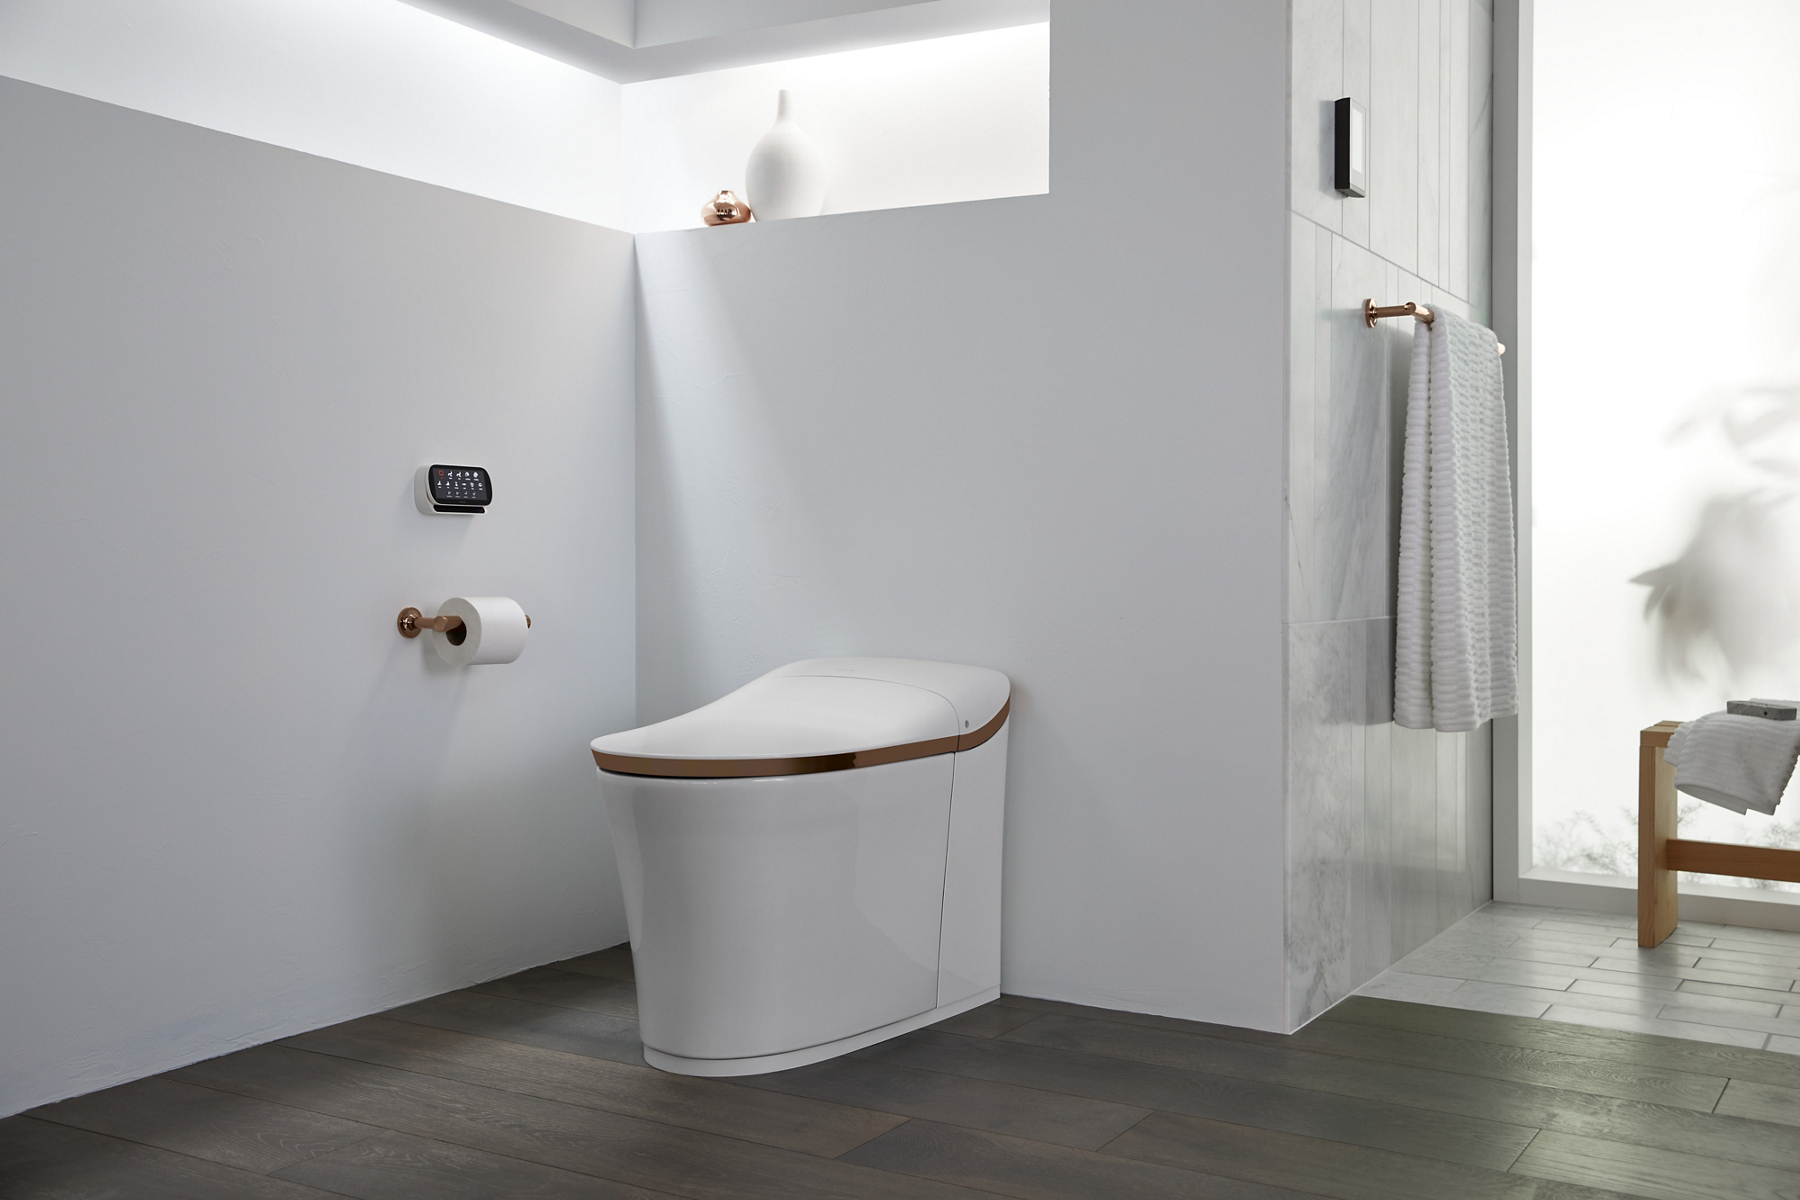 A white KOHLER Eir Intelligent toilet with wall mounted control panel in a bathroom with gray floors and white walls.